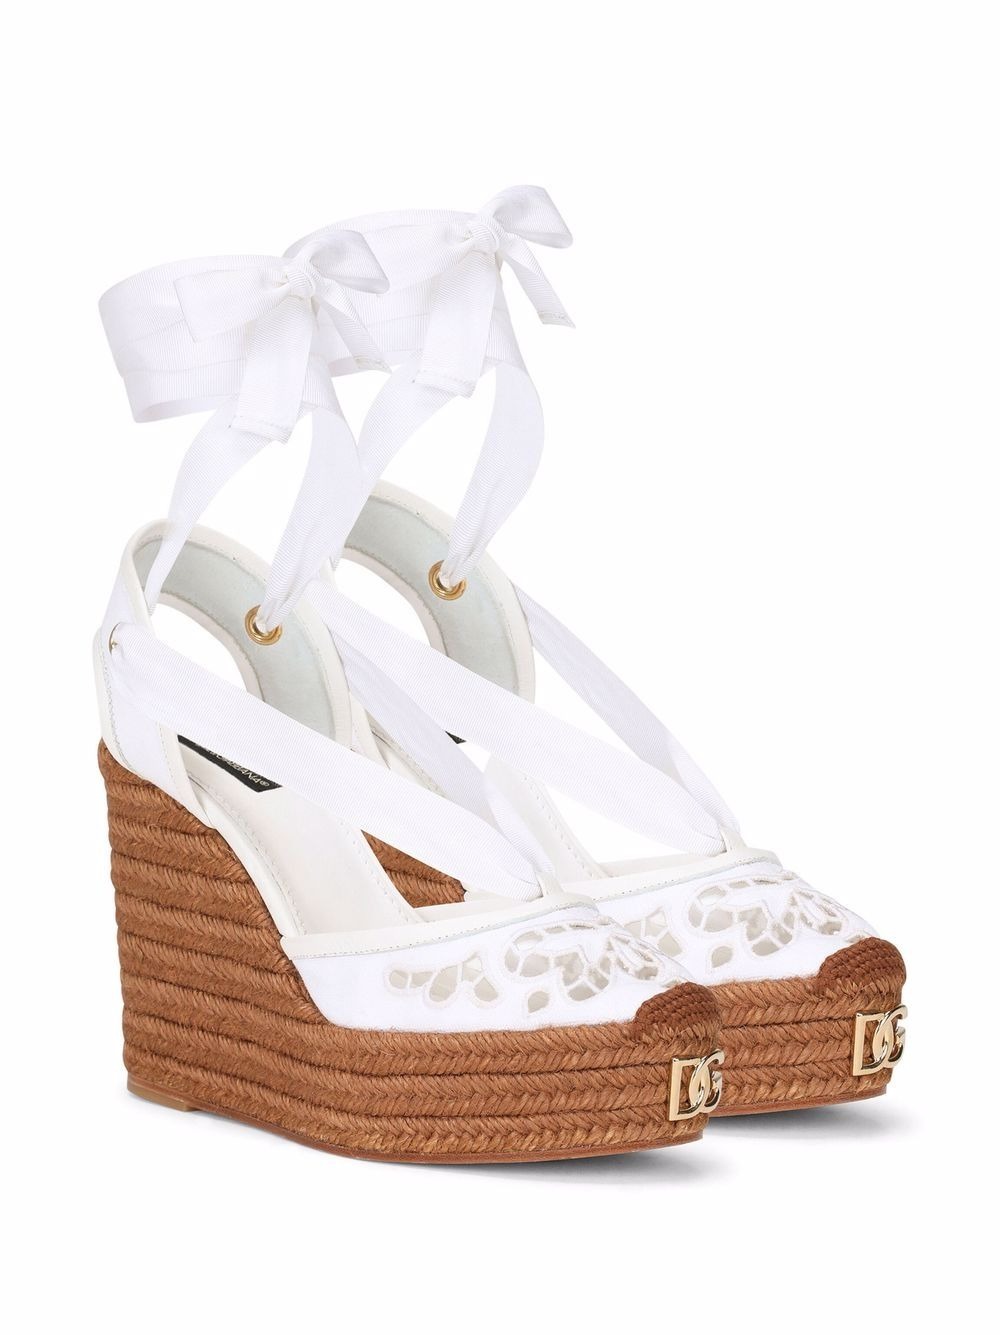 espadrille wedges with lace up ties for outdoor wedding